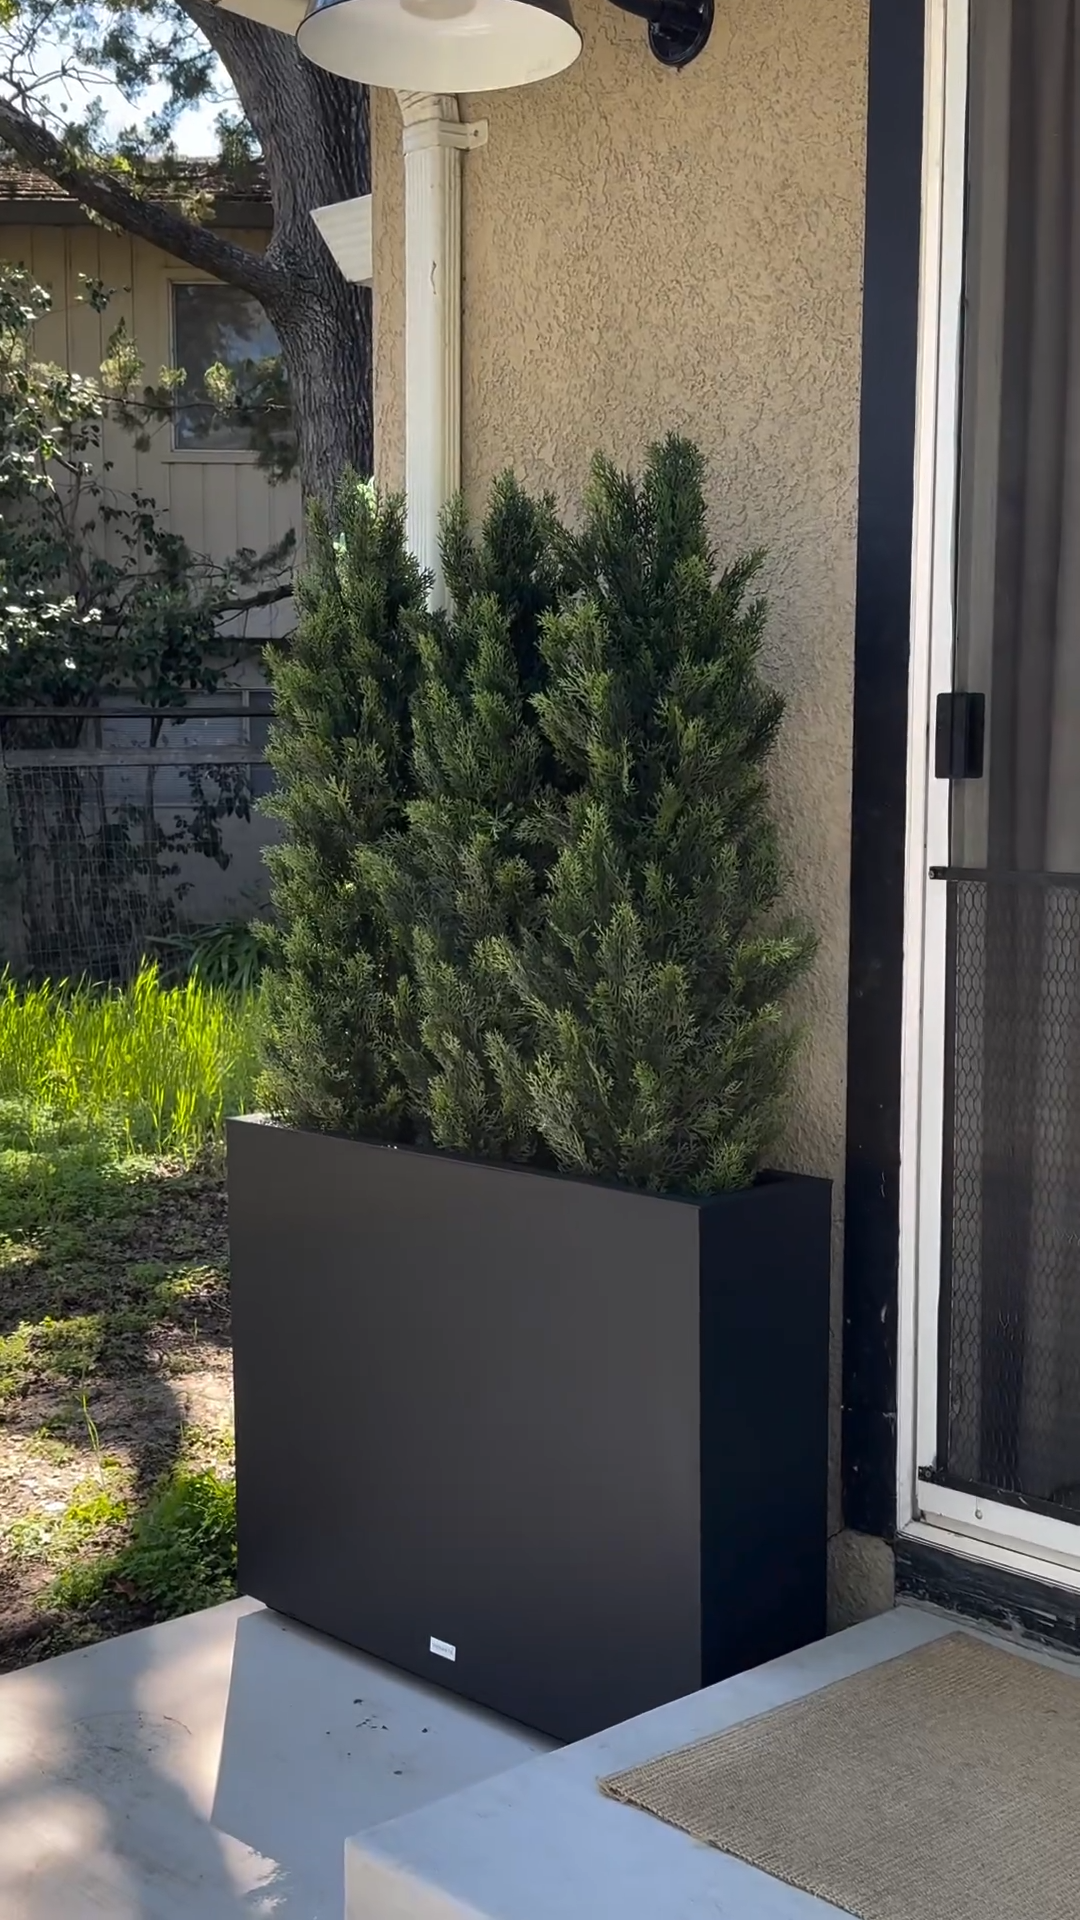 Beautiful privacy screen with cedar trees & planters lit up at night with solar lights